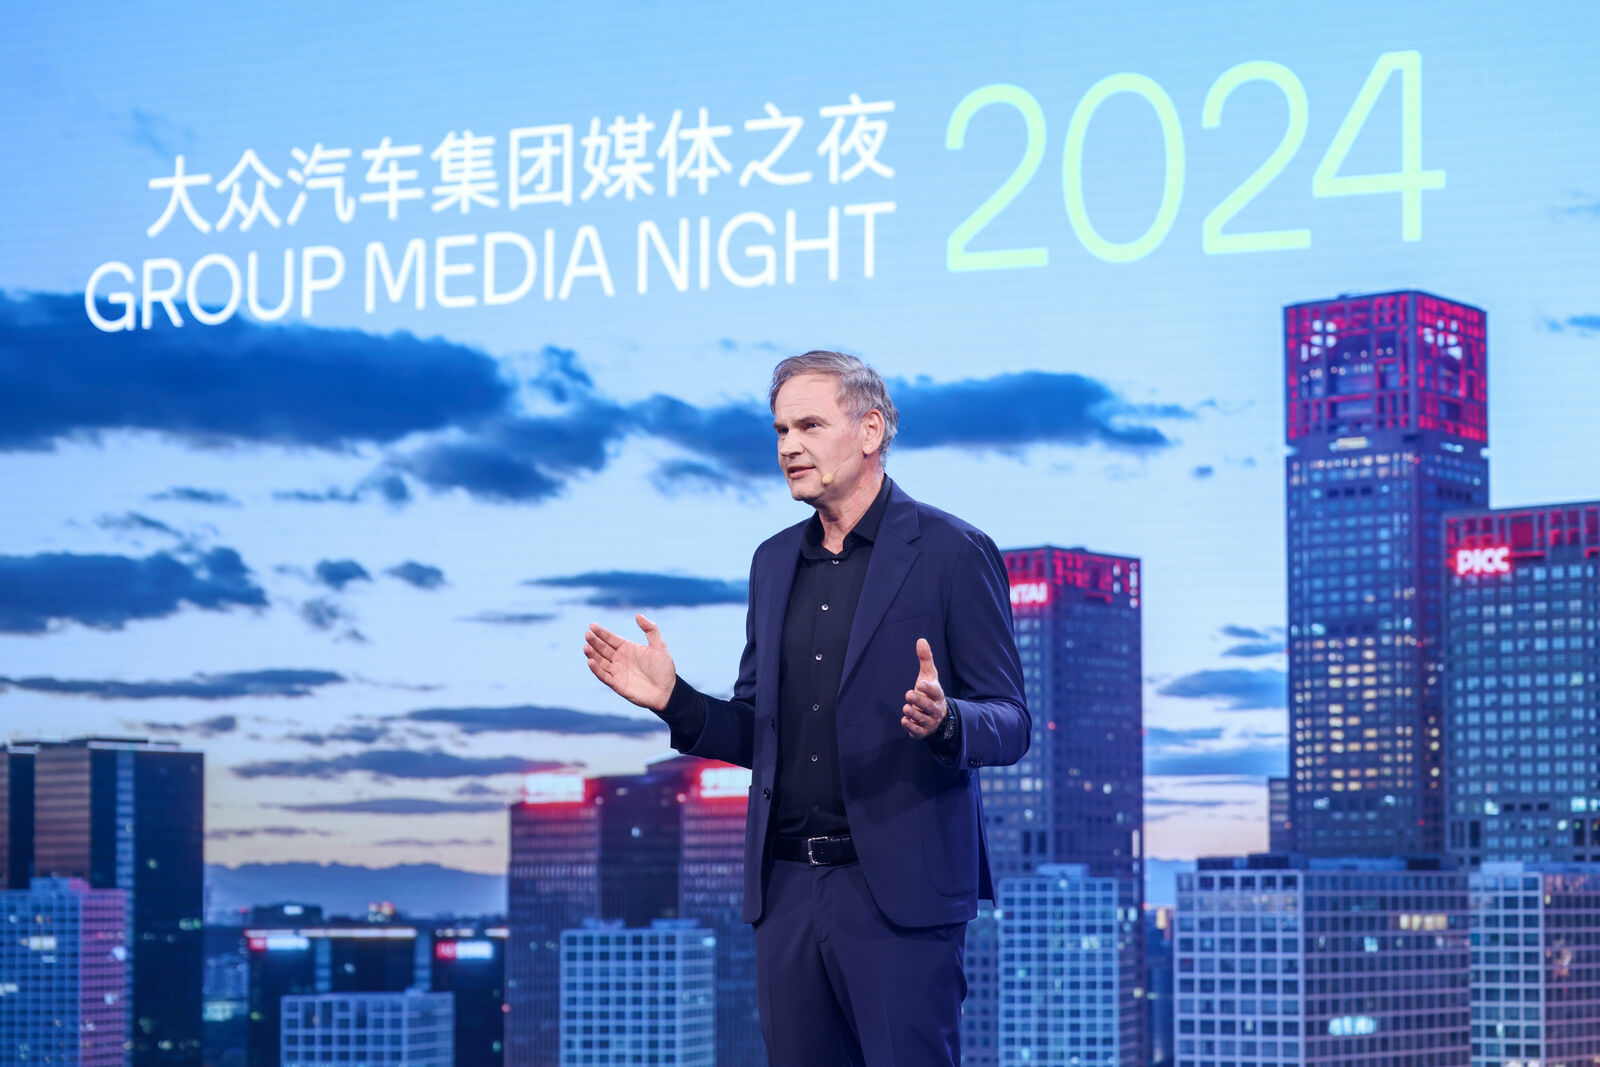 A presenter speaks at the "Group Media Night 2024" event, gesturing with his hands to emphasize his points. Behind him, the screen shows a cityscape with a twilight sky, while the event title and year are prominently displayed in both Chinese and English.